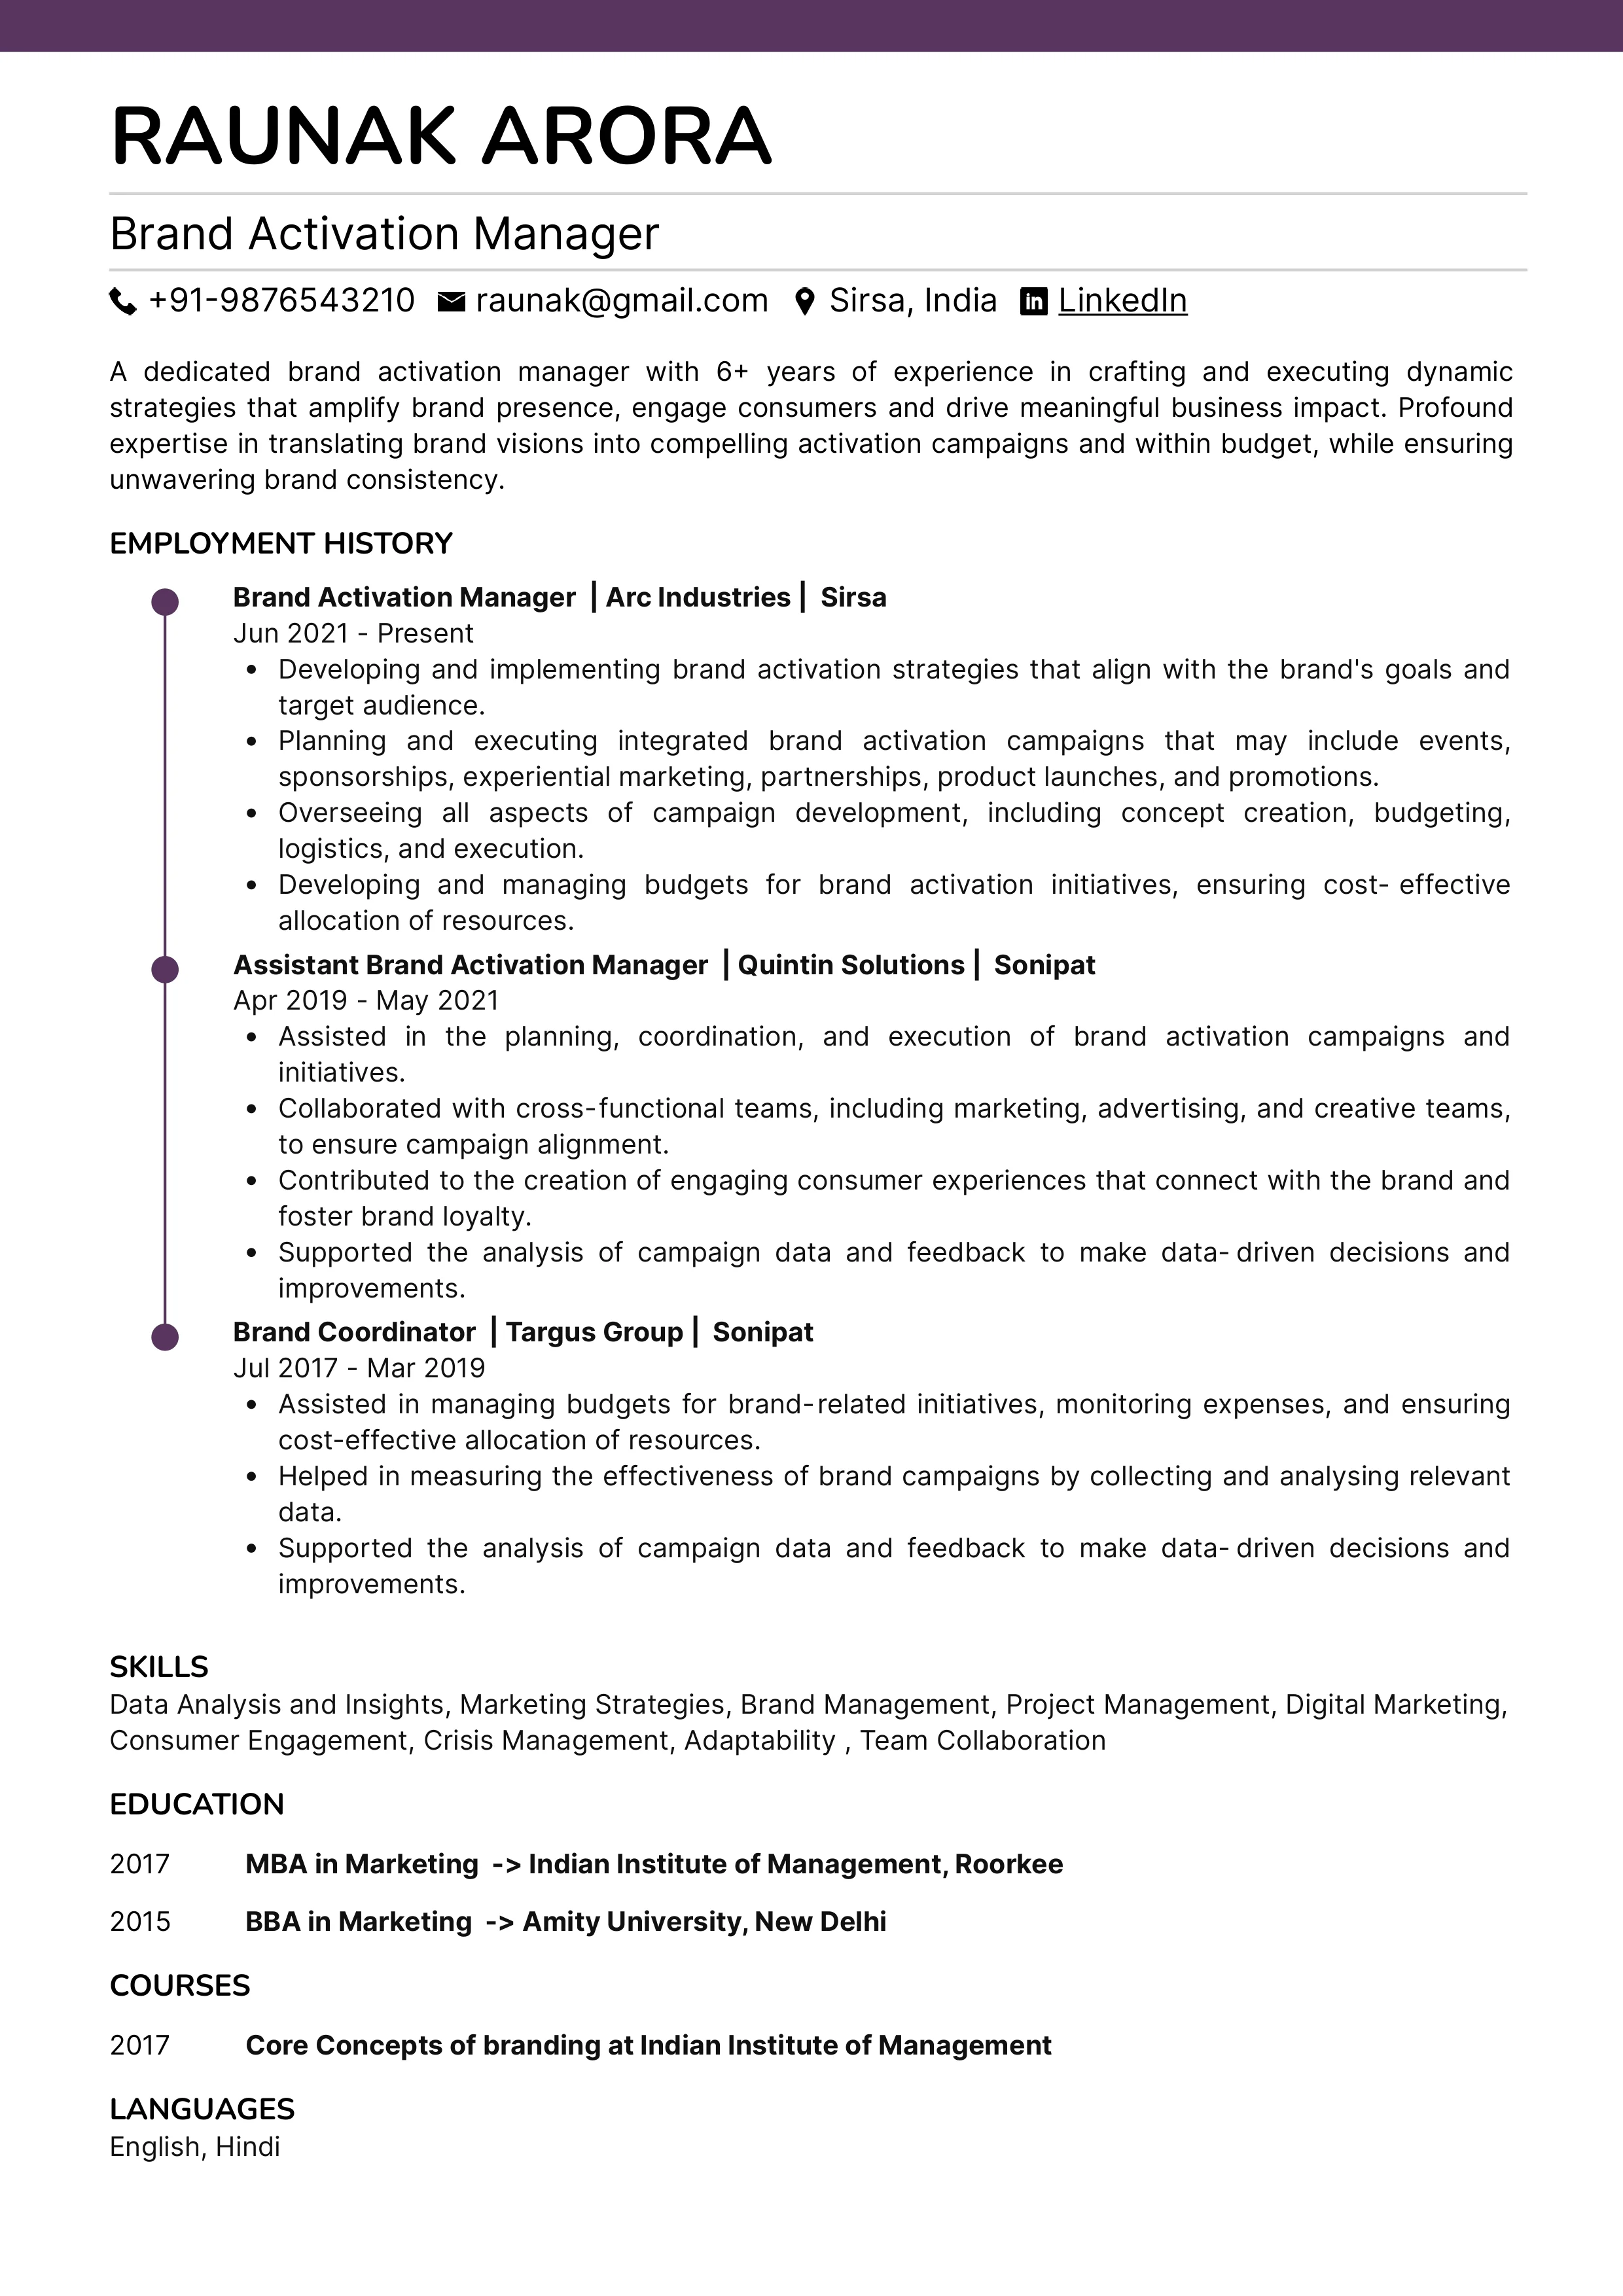 Sample Resume of Brand Activation Manager | Free Resume Templates & Samples on Resumod.co